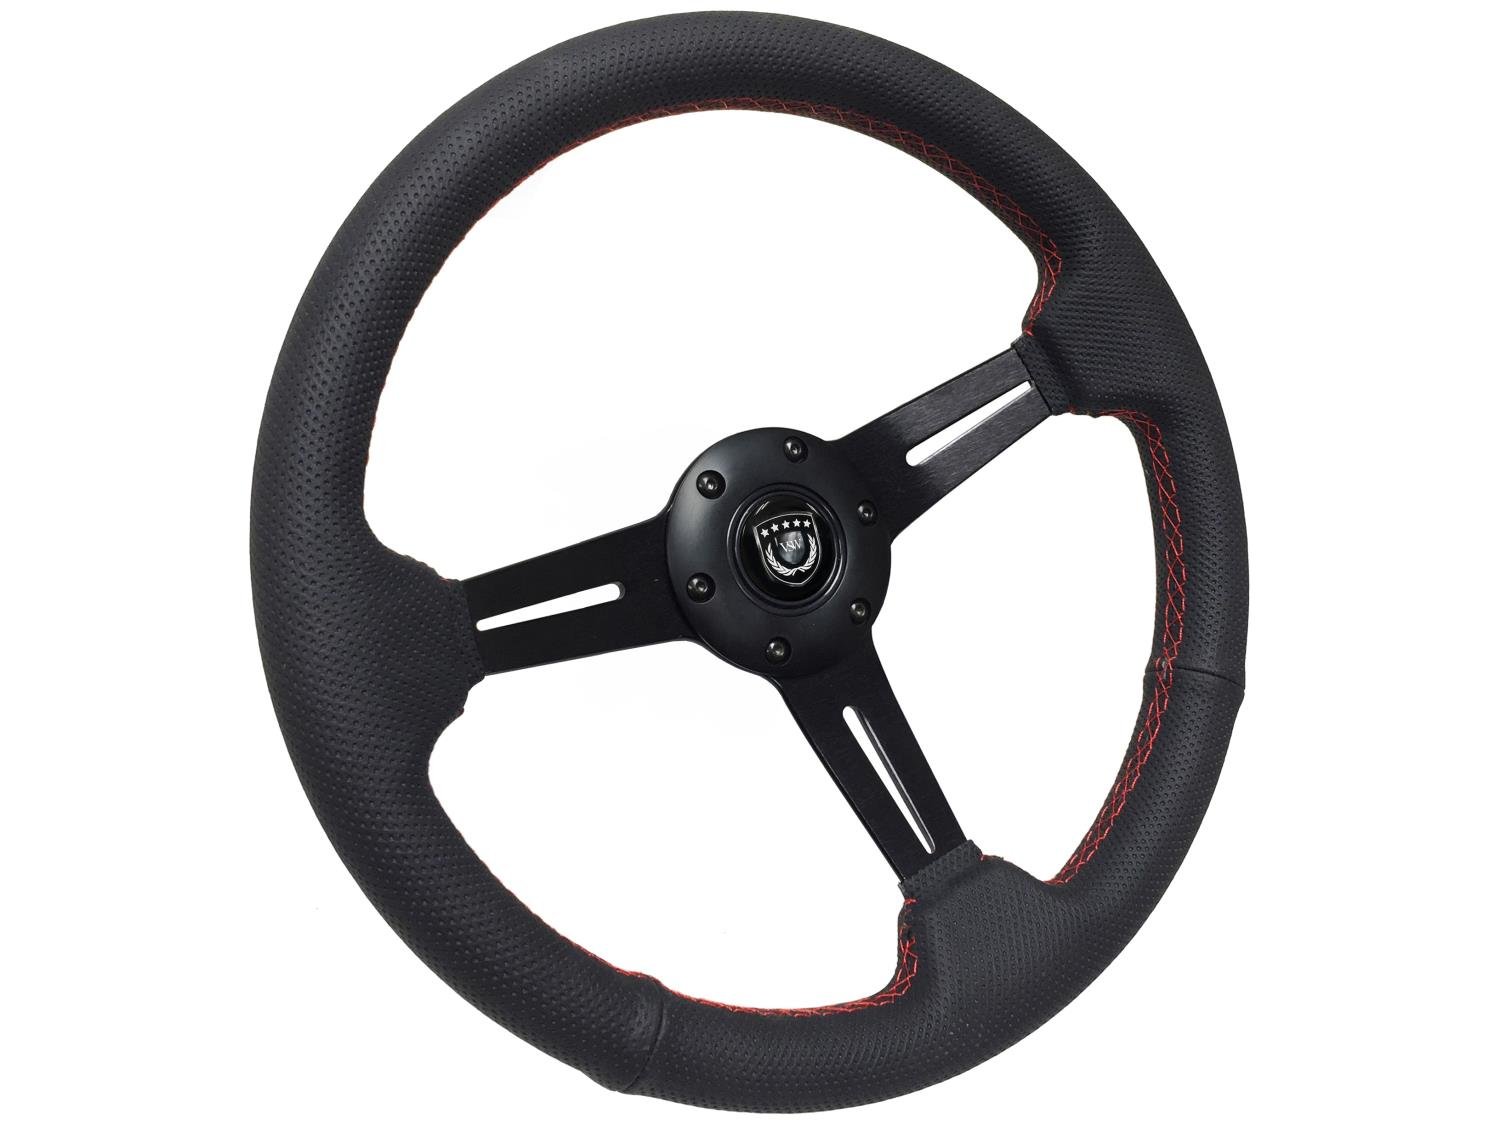 S6 Sport Steering Wheel, 14 in. Diameter, Perforated Black Leather Grip with Red Stitching